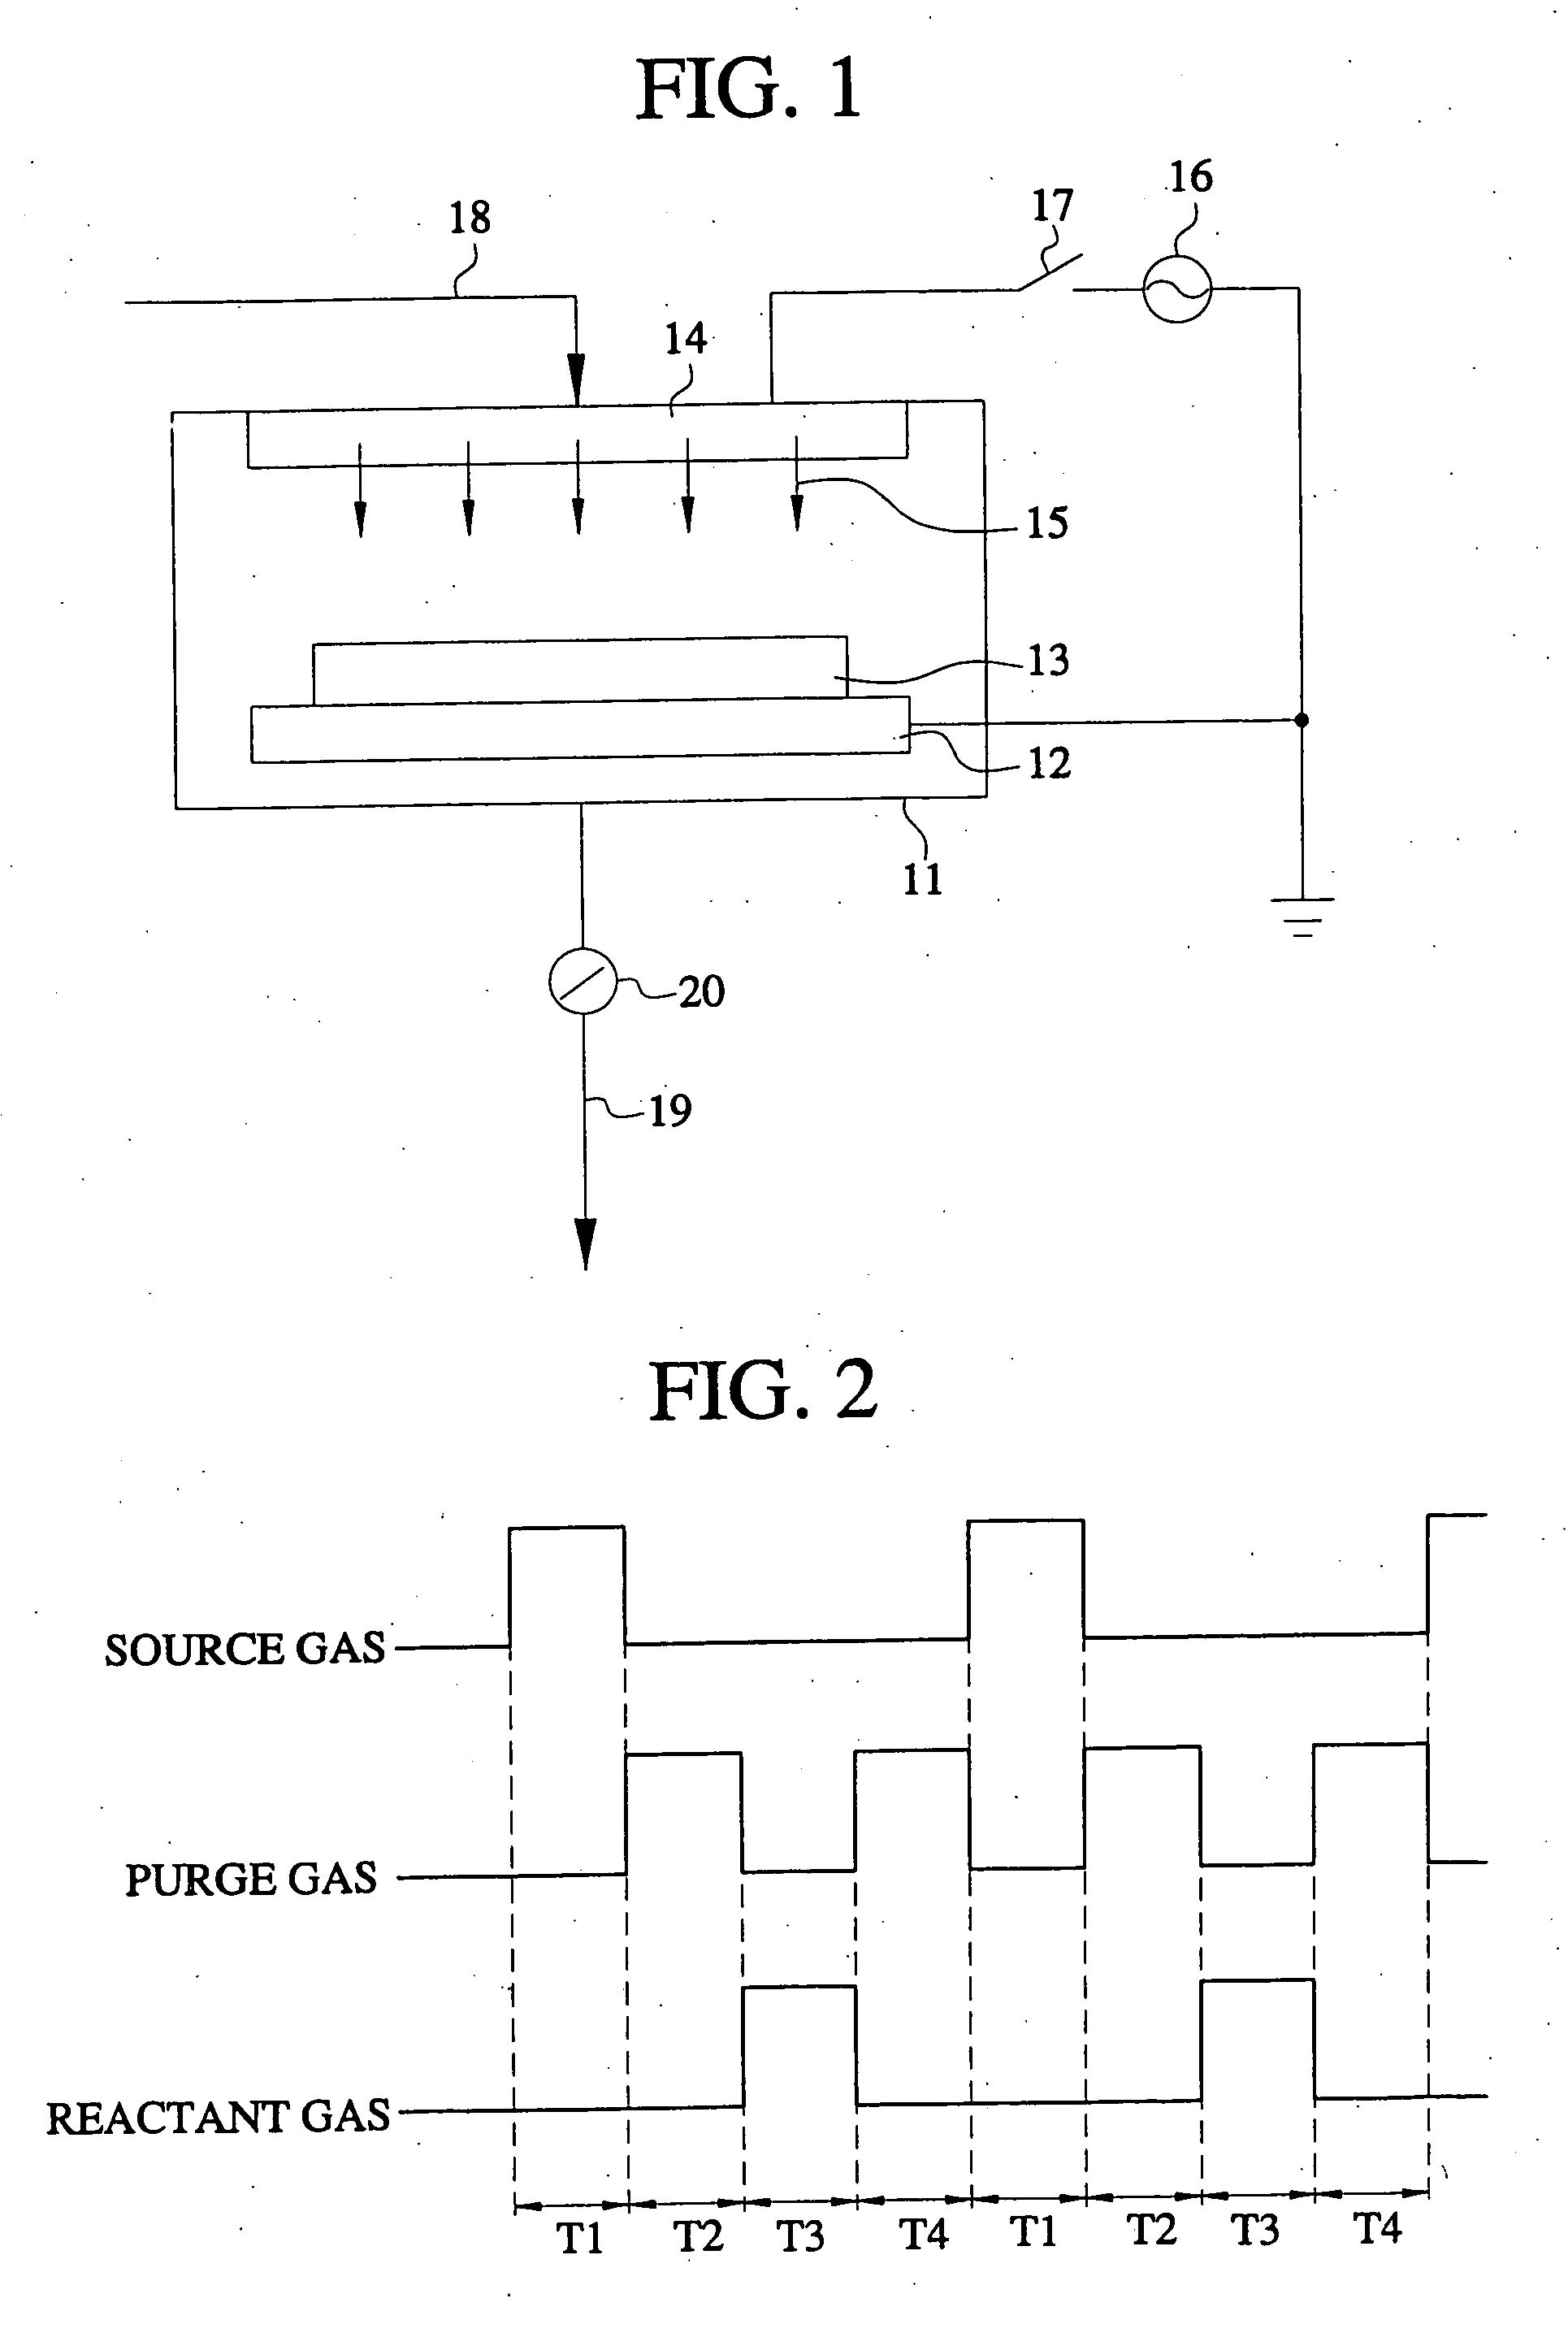 Method of forming a carbon nano-material layer using a cyclic deposition technique